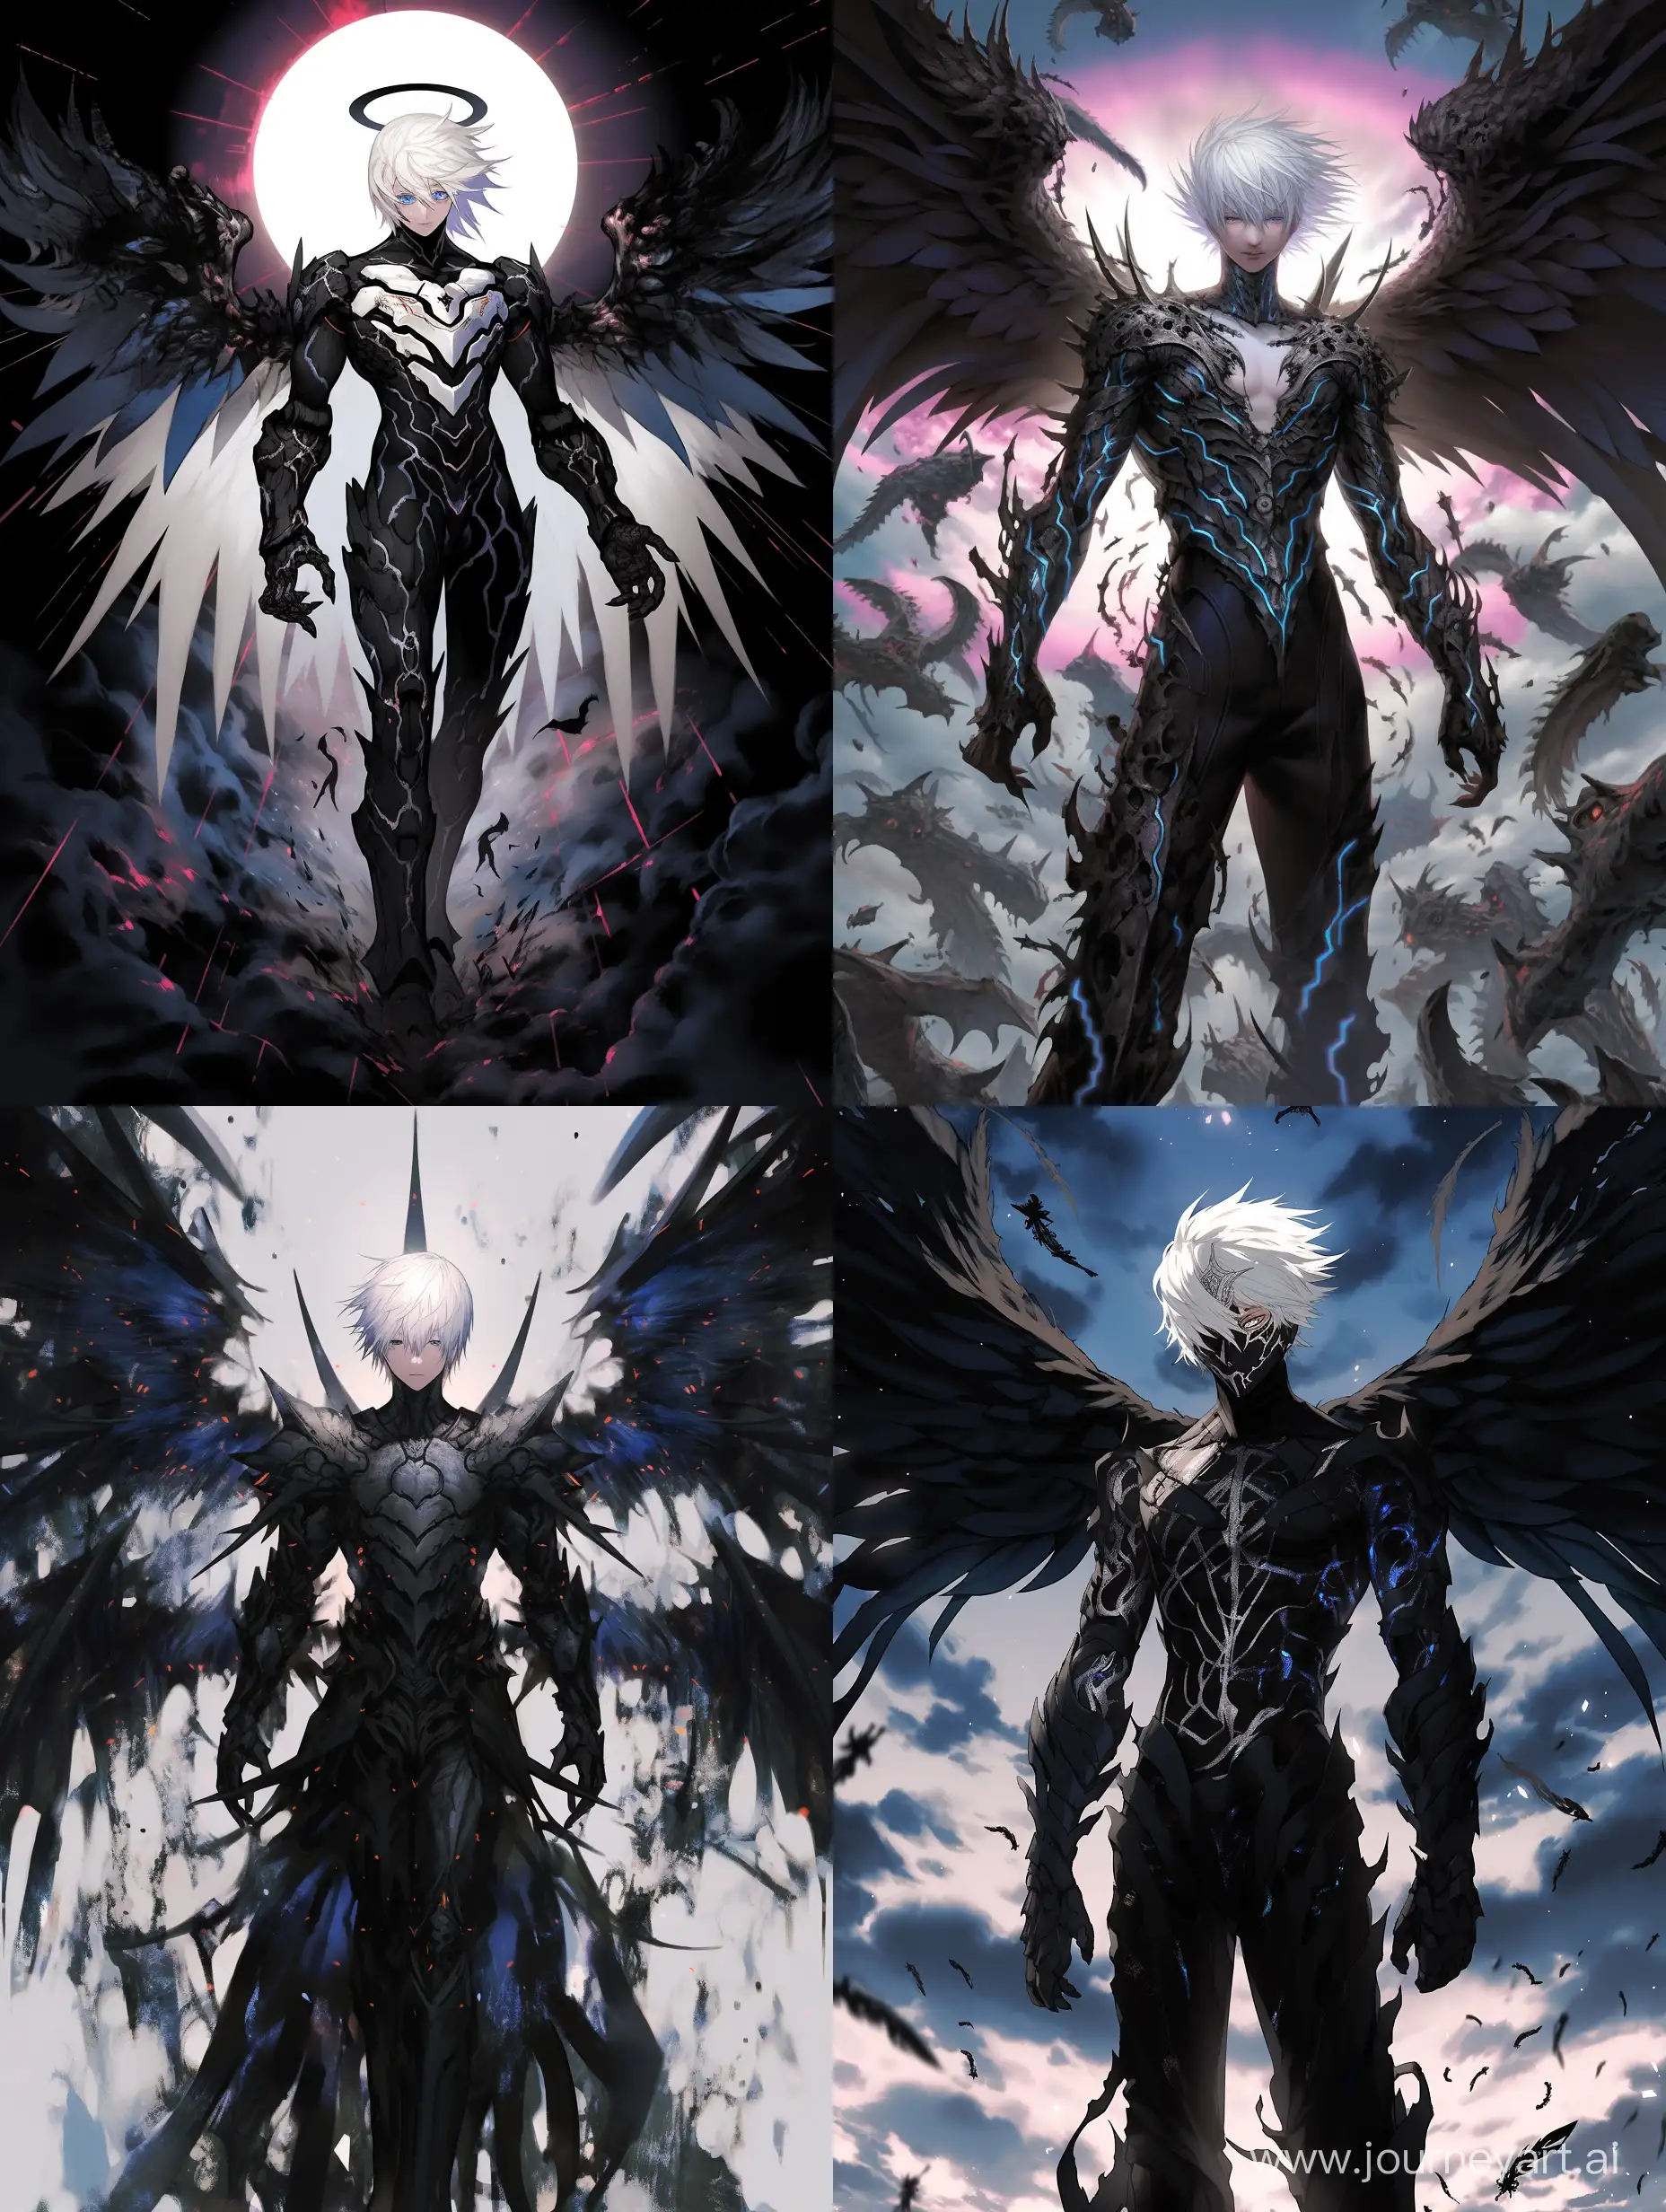 Dark-Angel-with-Spread-Black-Wings-in-Sky-Whitehaired-Figure-in-ArmorLike-Outfit